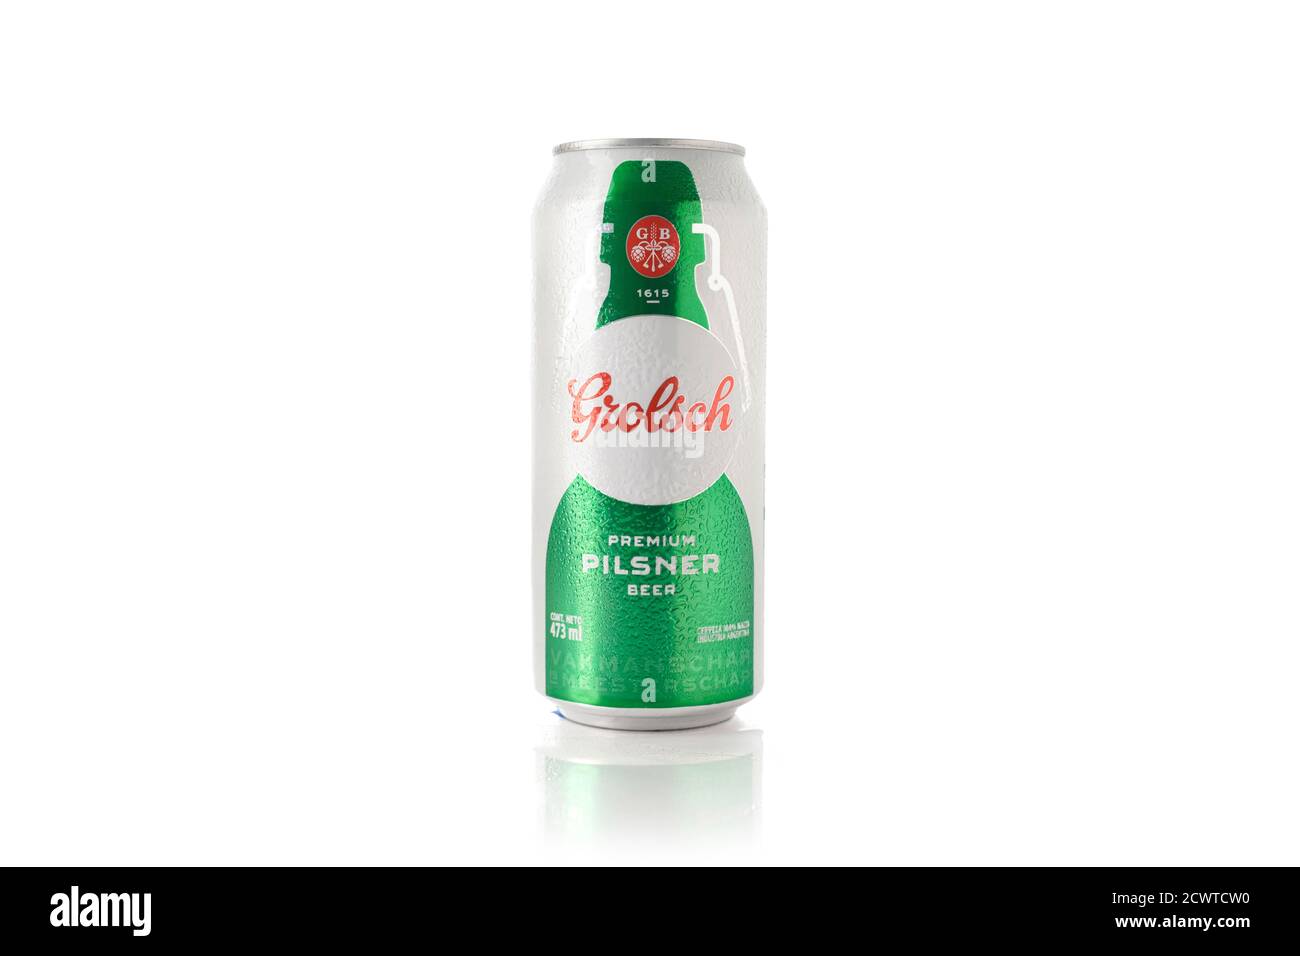 Grolsch beer can isolated on white background. Alcoholic beverage. Stock Photo